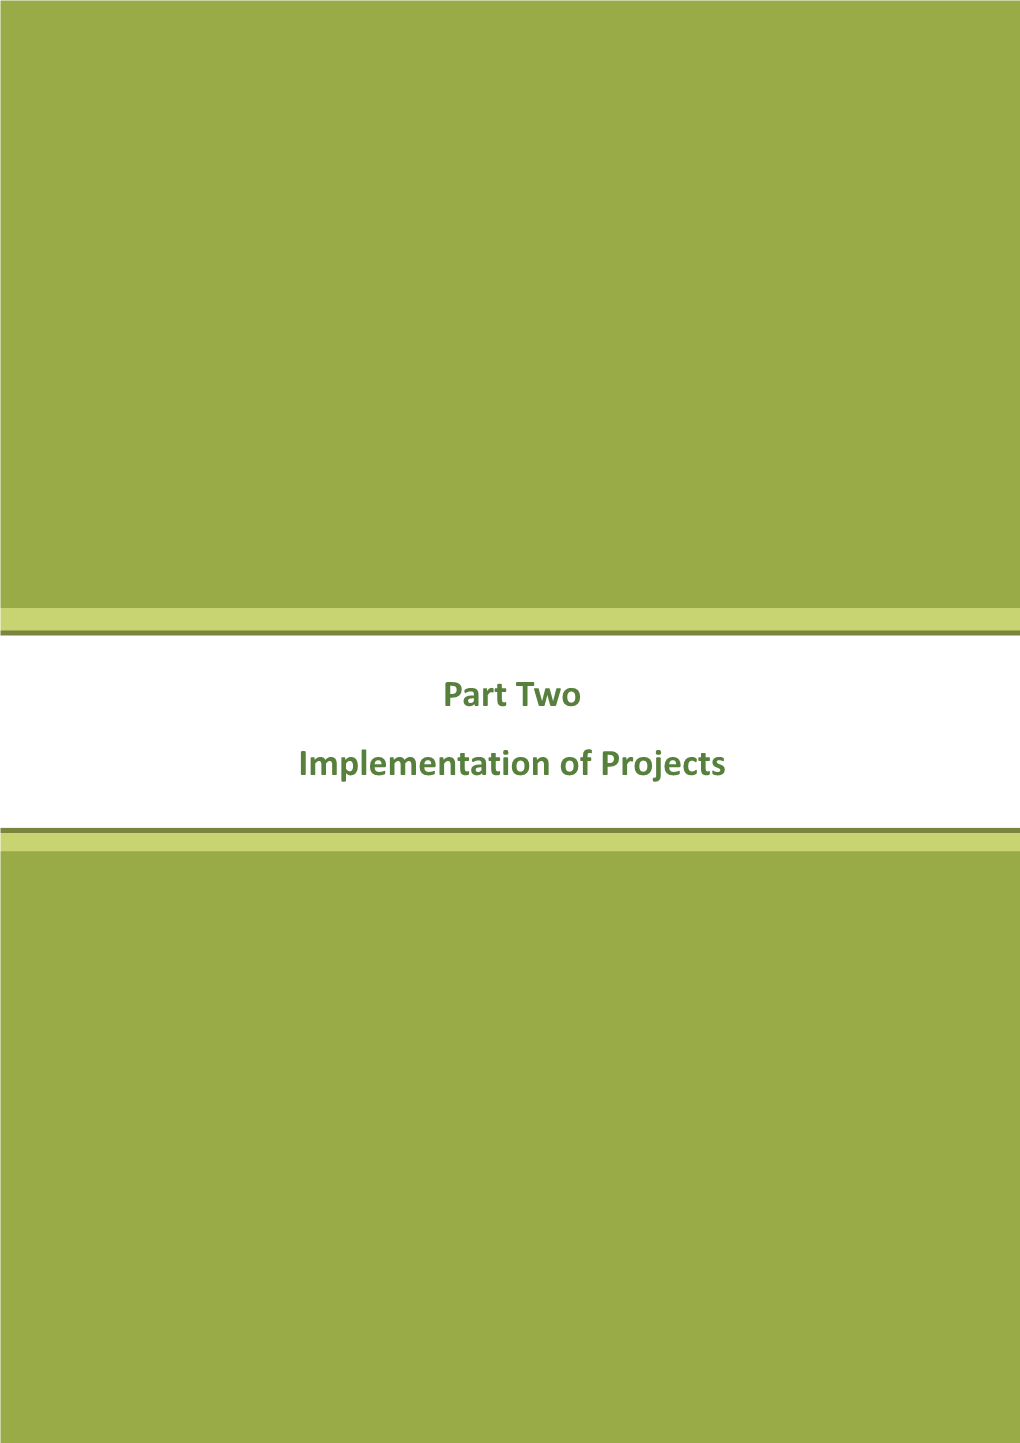 Part 2 Implementation of Projects